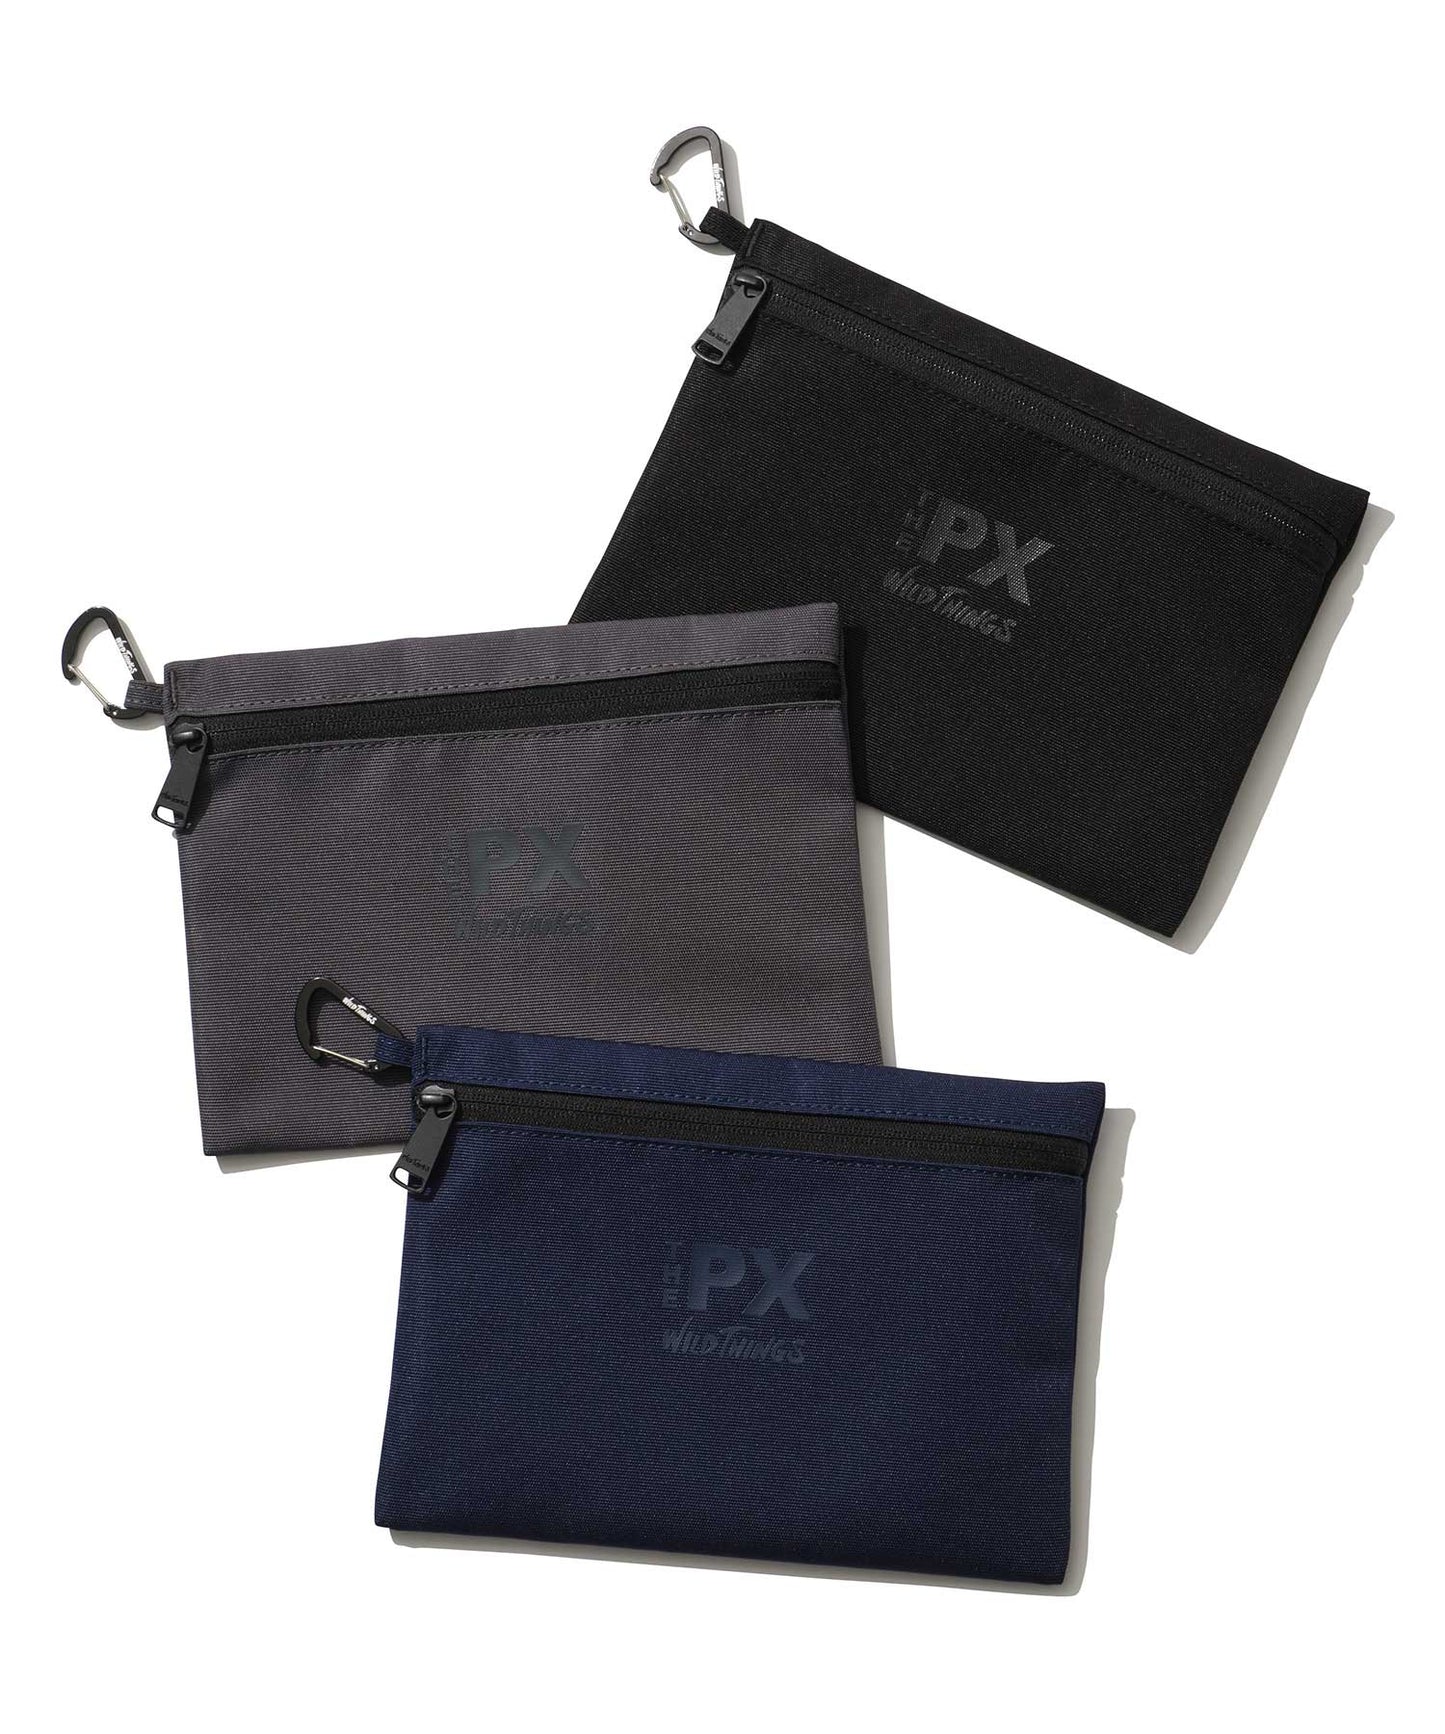 [WILD THINGS ワイルドシングス] THE PX MULTI POUCH A5｜マルチポーチ(A5)＜BLACK＞